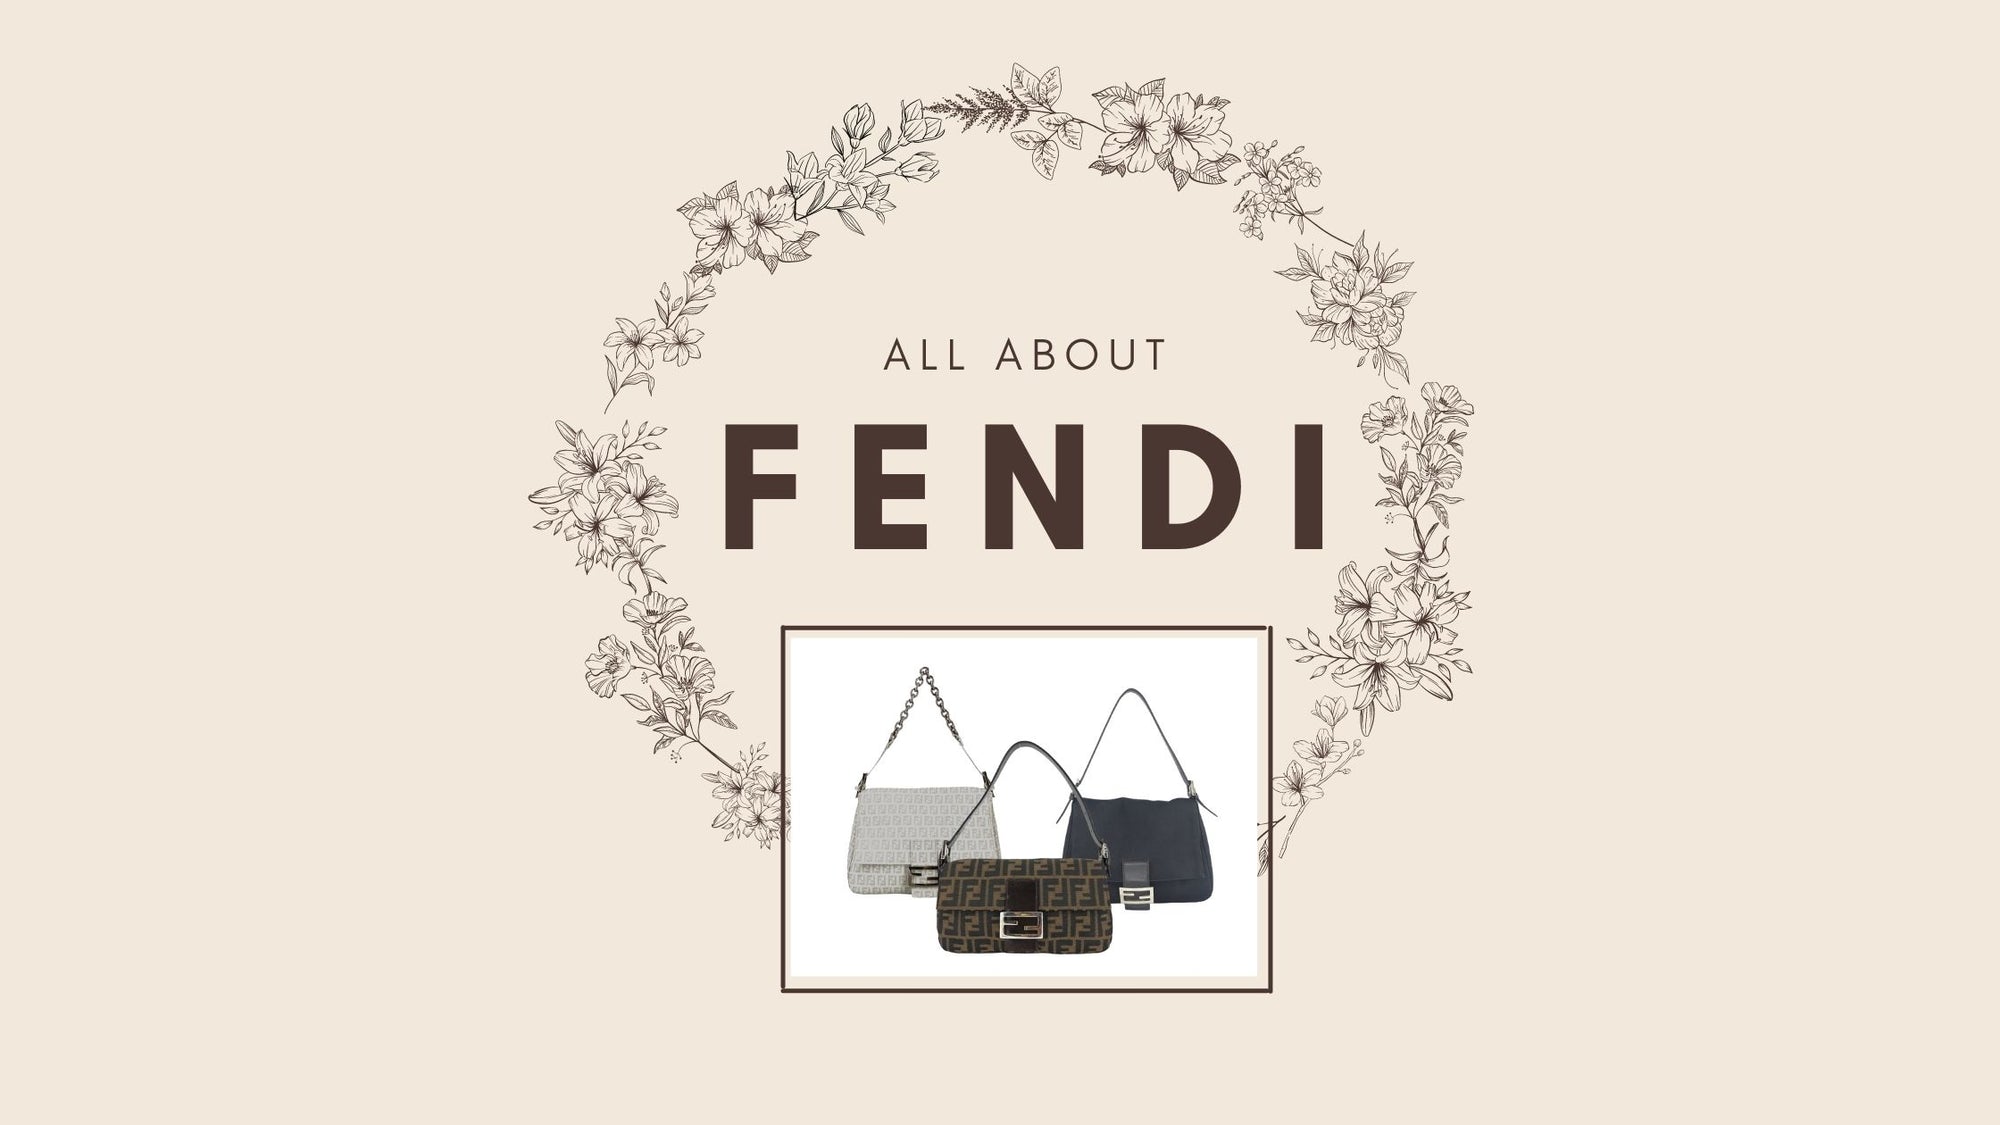 All About Fendi